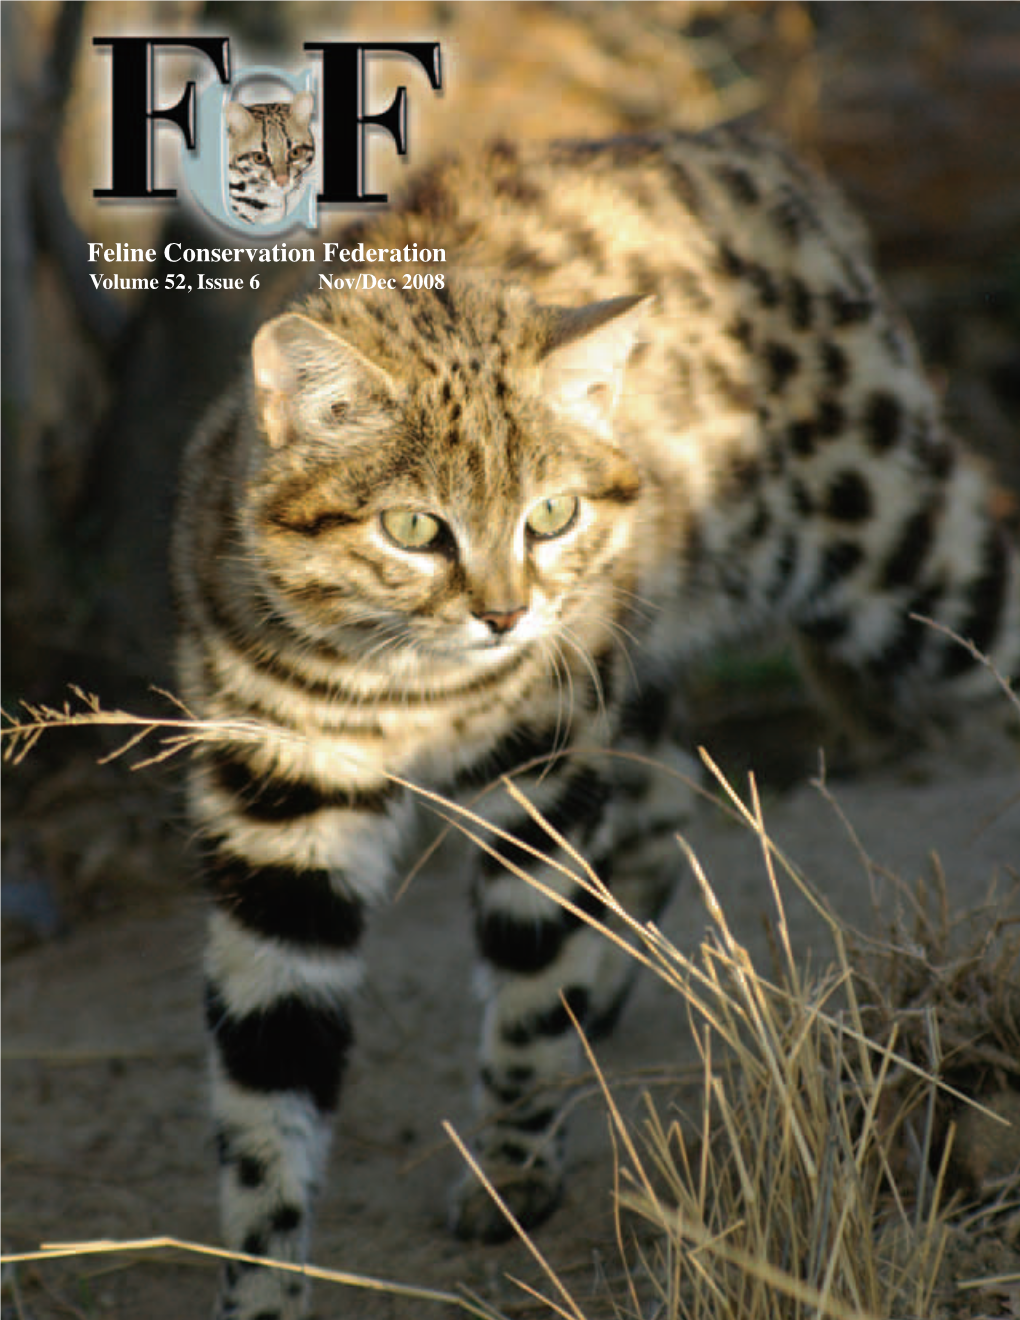 Feline Conservation Federation Volume 52, Issue 6 Nov/Dec 2008 Feline Conservation Federation Officers and Directors Contact Information